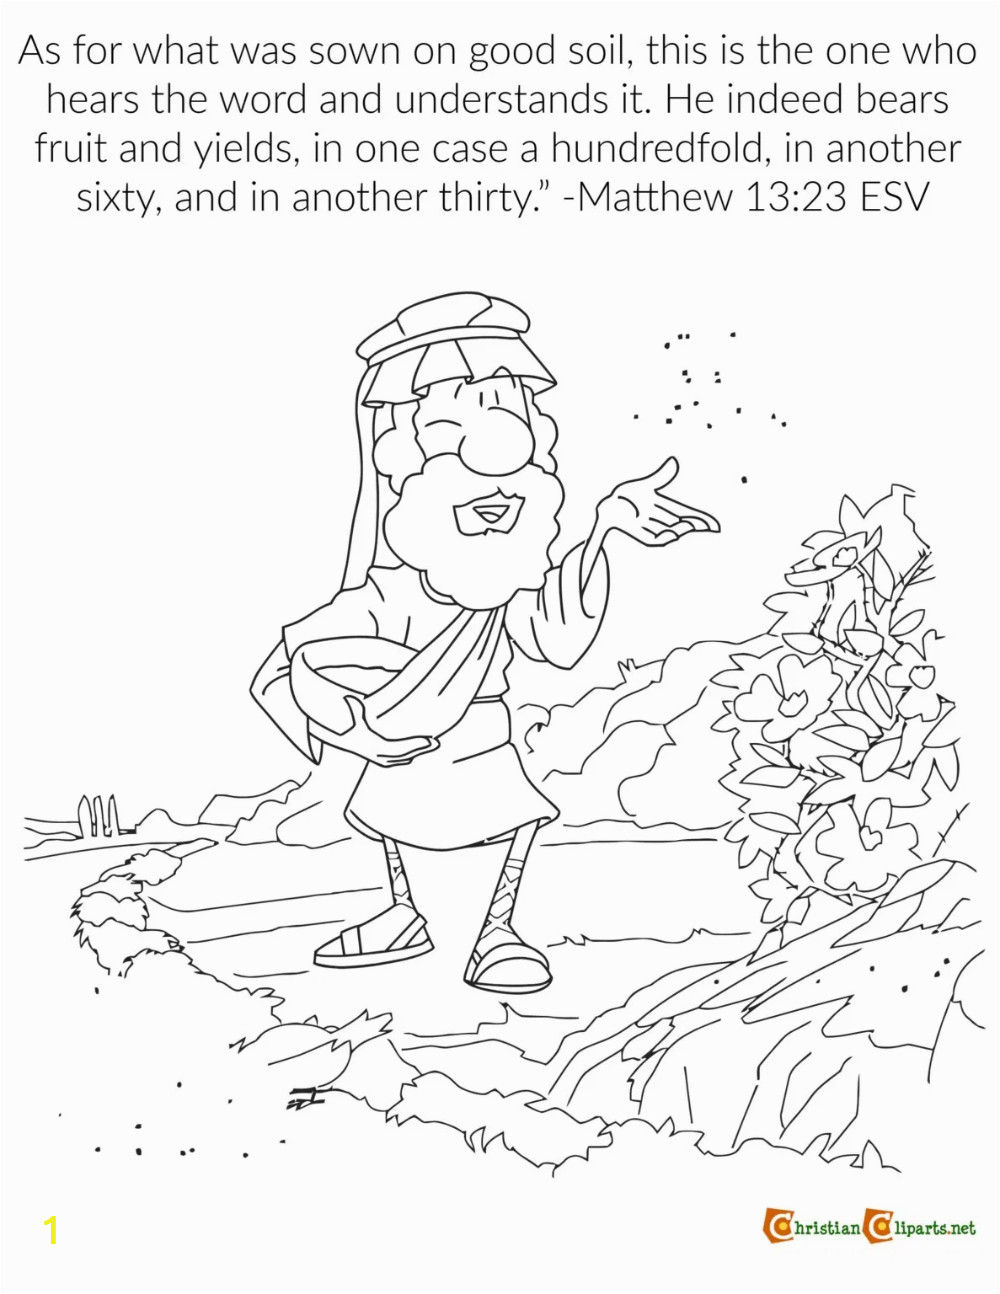 Parable Of the sower Bible Coloring Pages Sunday School Lessons Matthew 13 1 9 18 23 the Parable